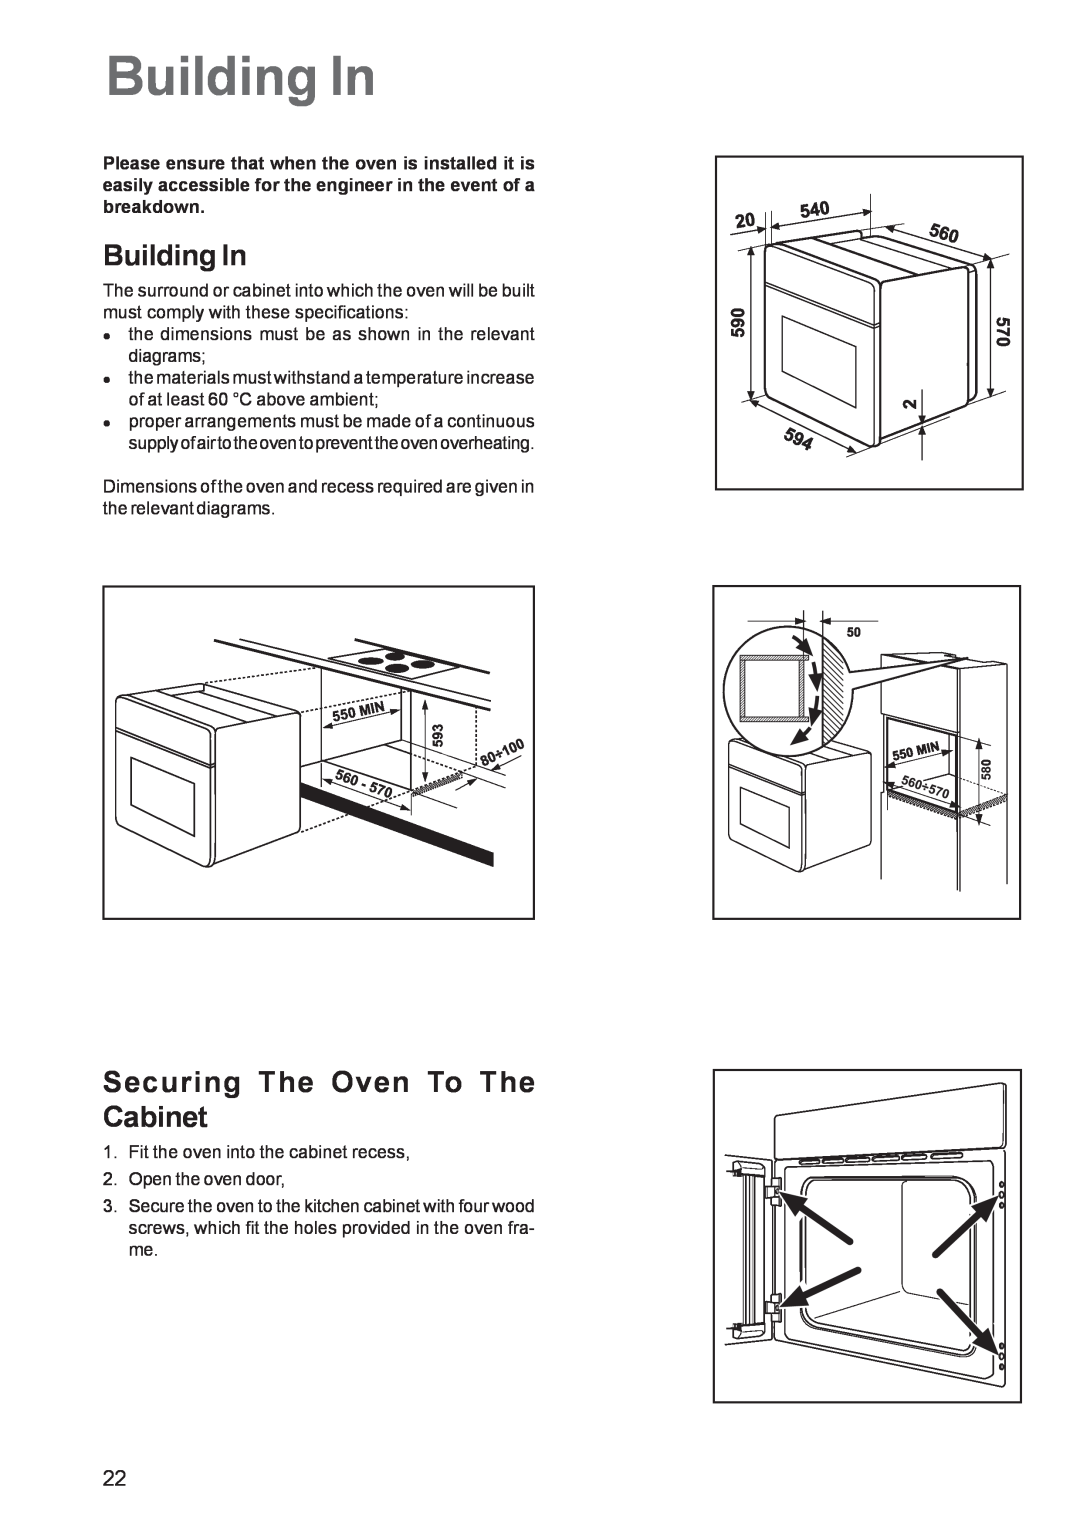 Zanussi ZBF 569 manual Building In, Securing The Oven To The Cabinet 